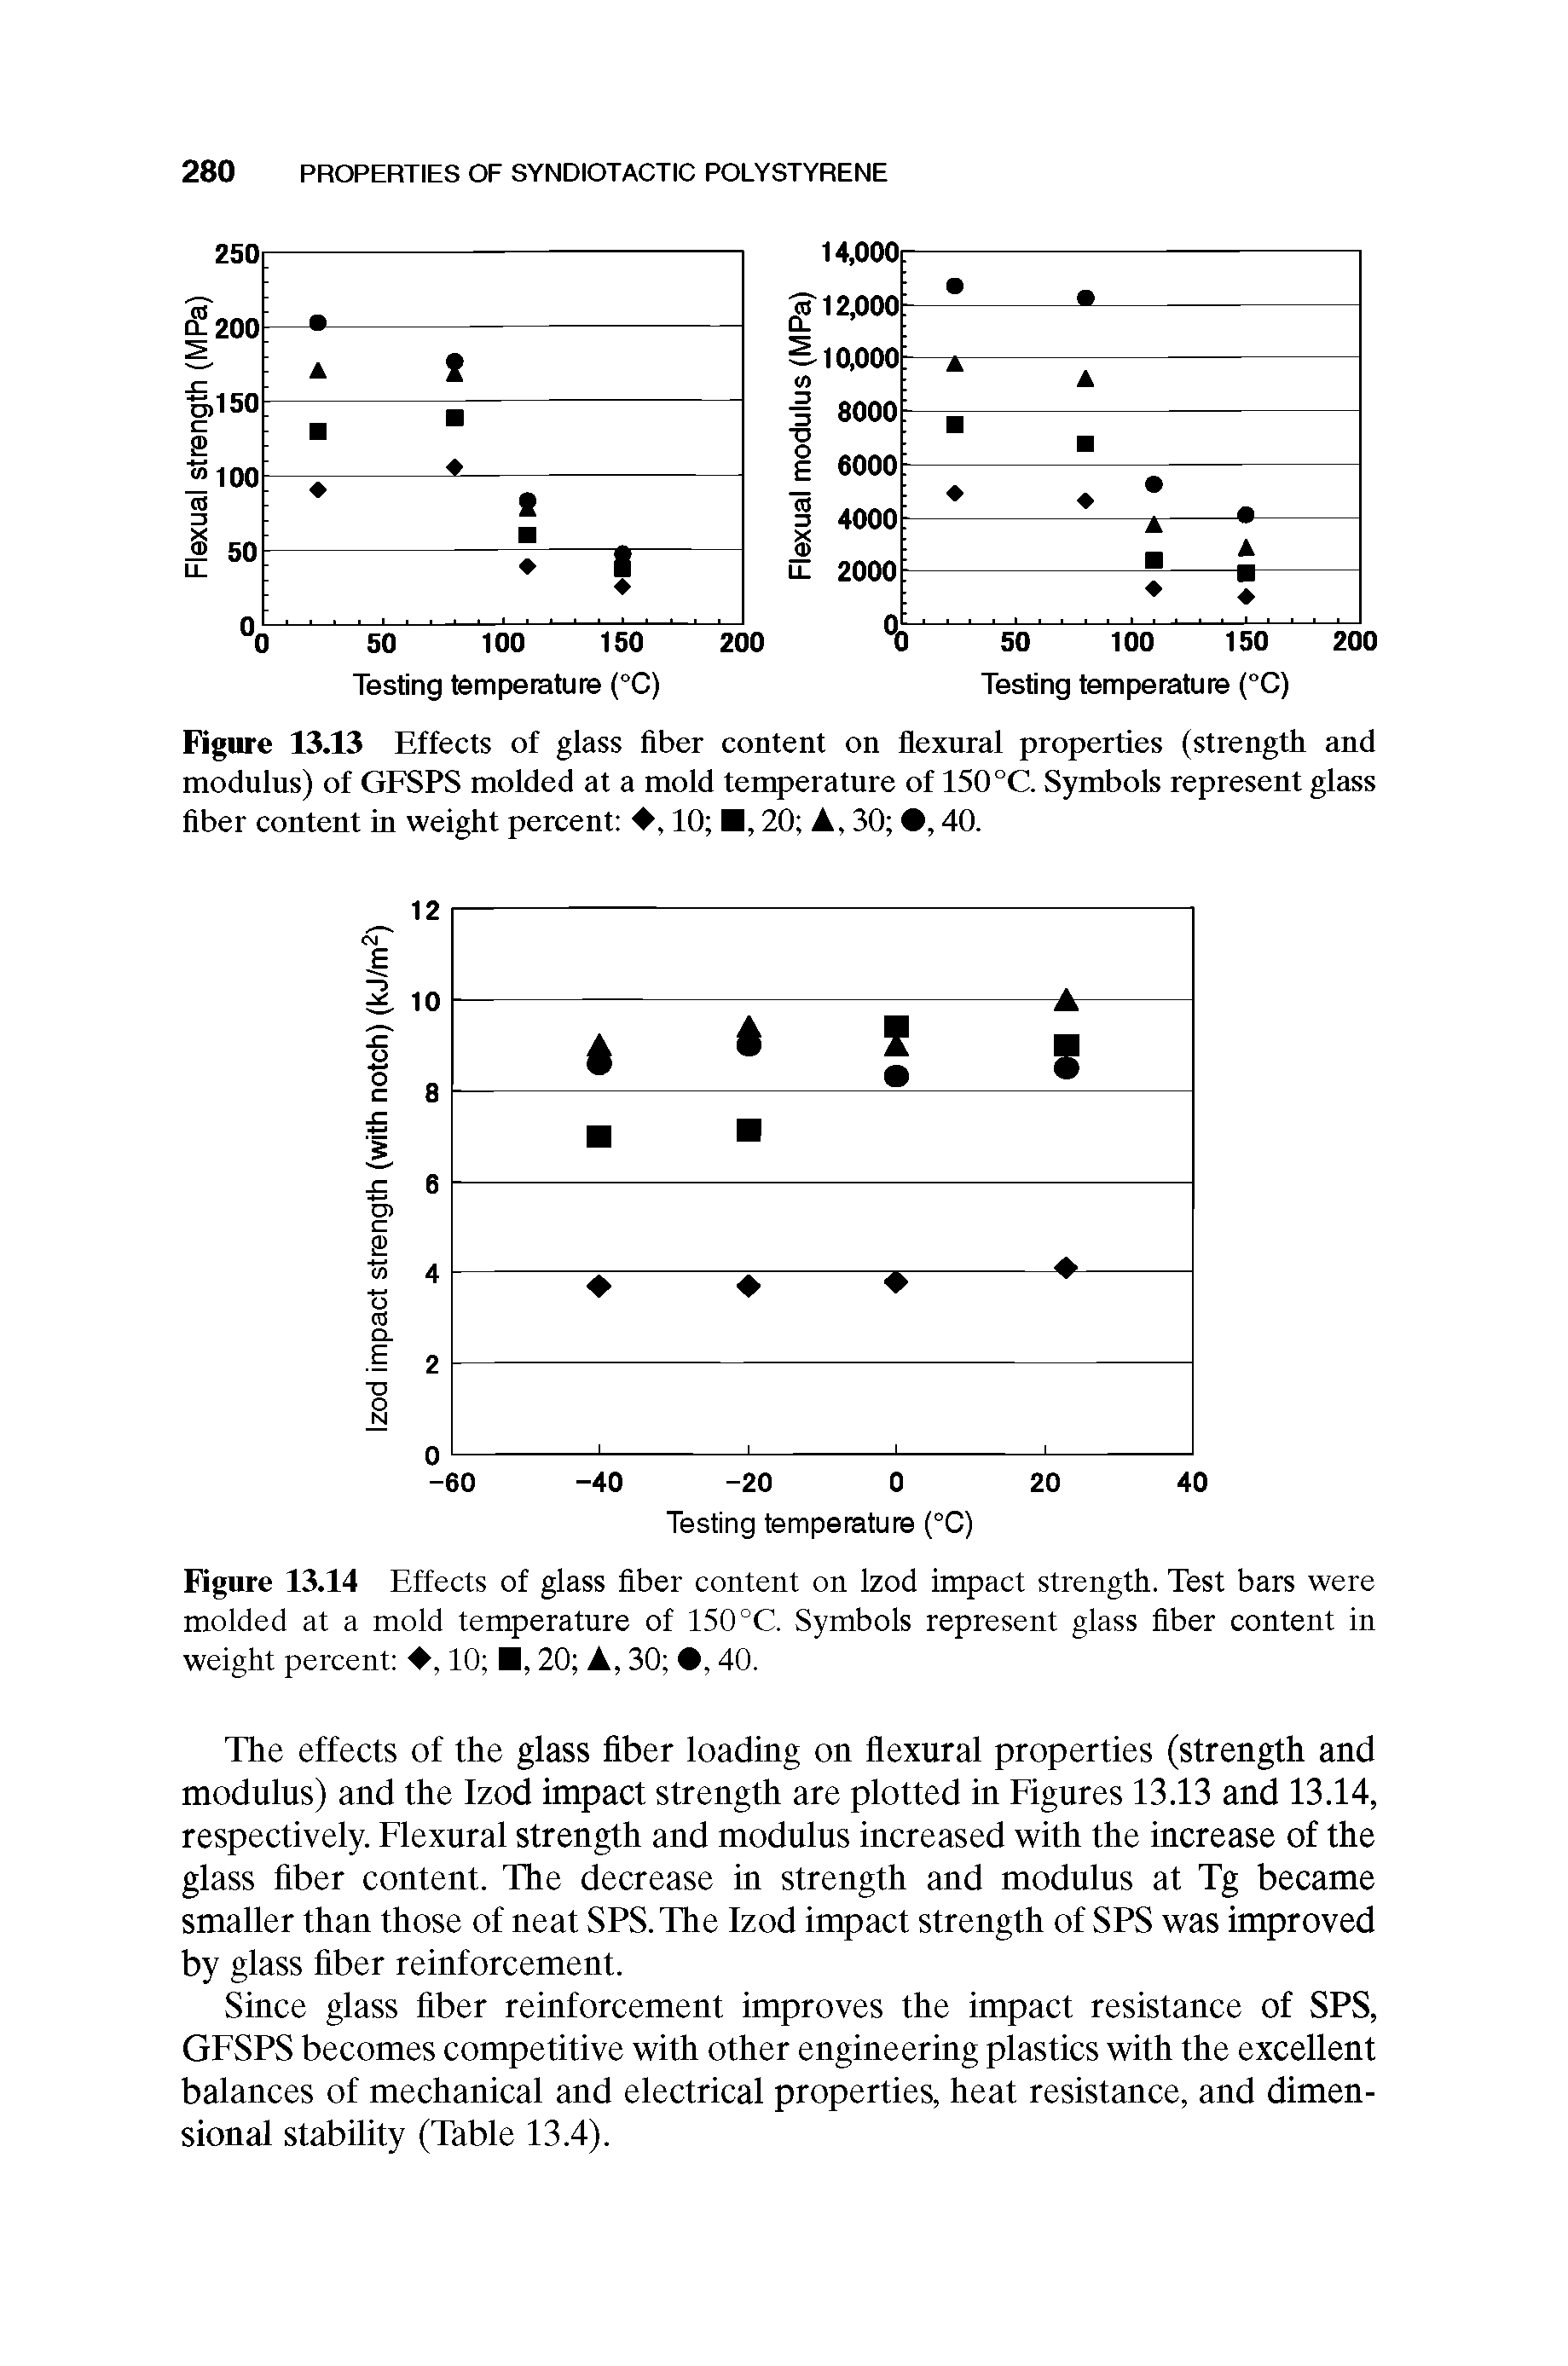 Figure 13.14 Effects of glass fiber content on Izod impact strength. Test bars were molded at a mold temperature of 150 °C. Symbols represent glass fiber content in weight percent , 10 , 20 A, 30 , 40.